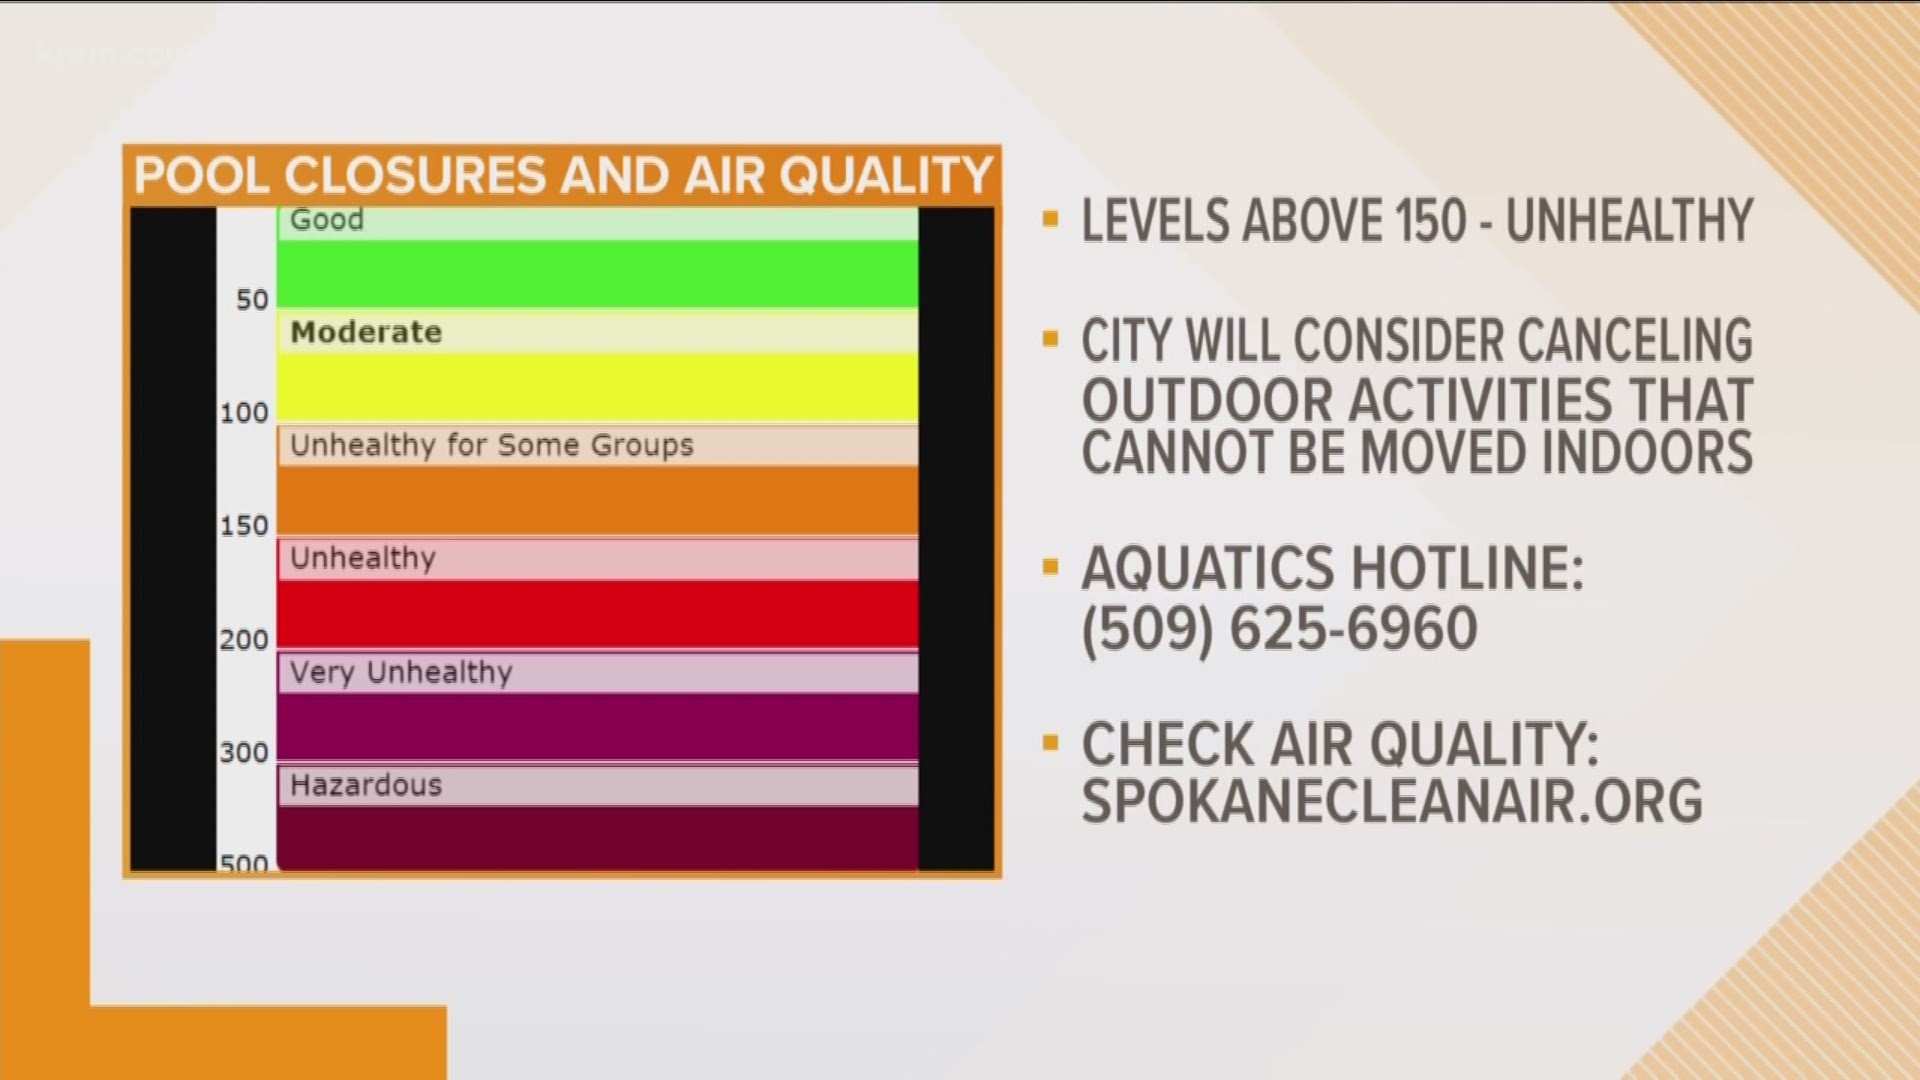 City of Spokane pools closed due to poor air quality (8-13-18)